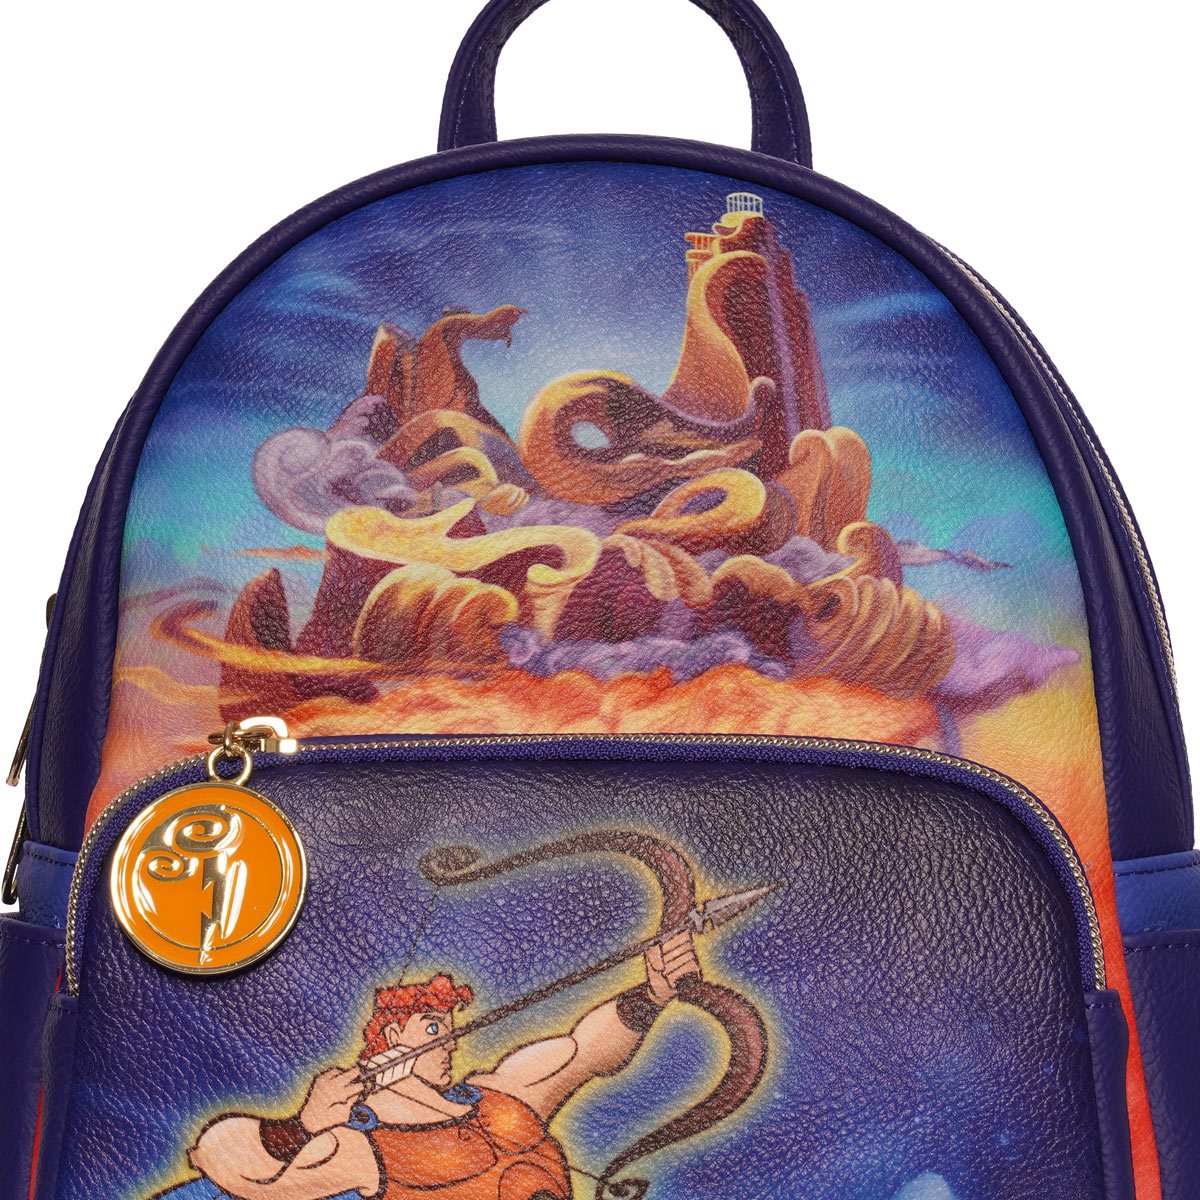 Load image into Gallery viewer, Mount Olympus (Hercules) Disney EE Exclusive Mini Backpack by Loungefly
